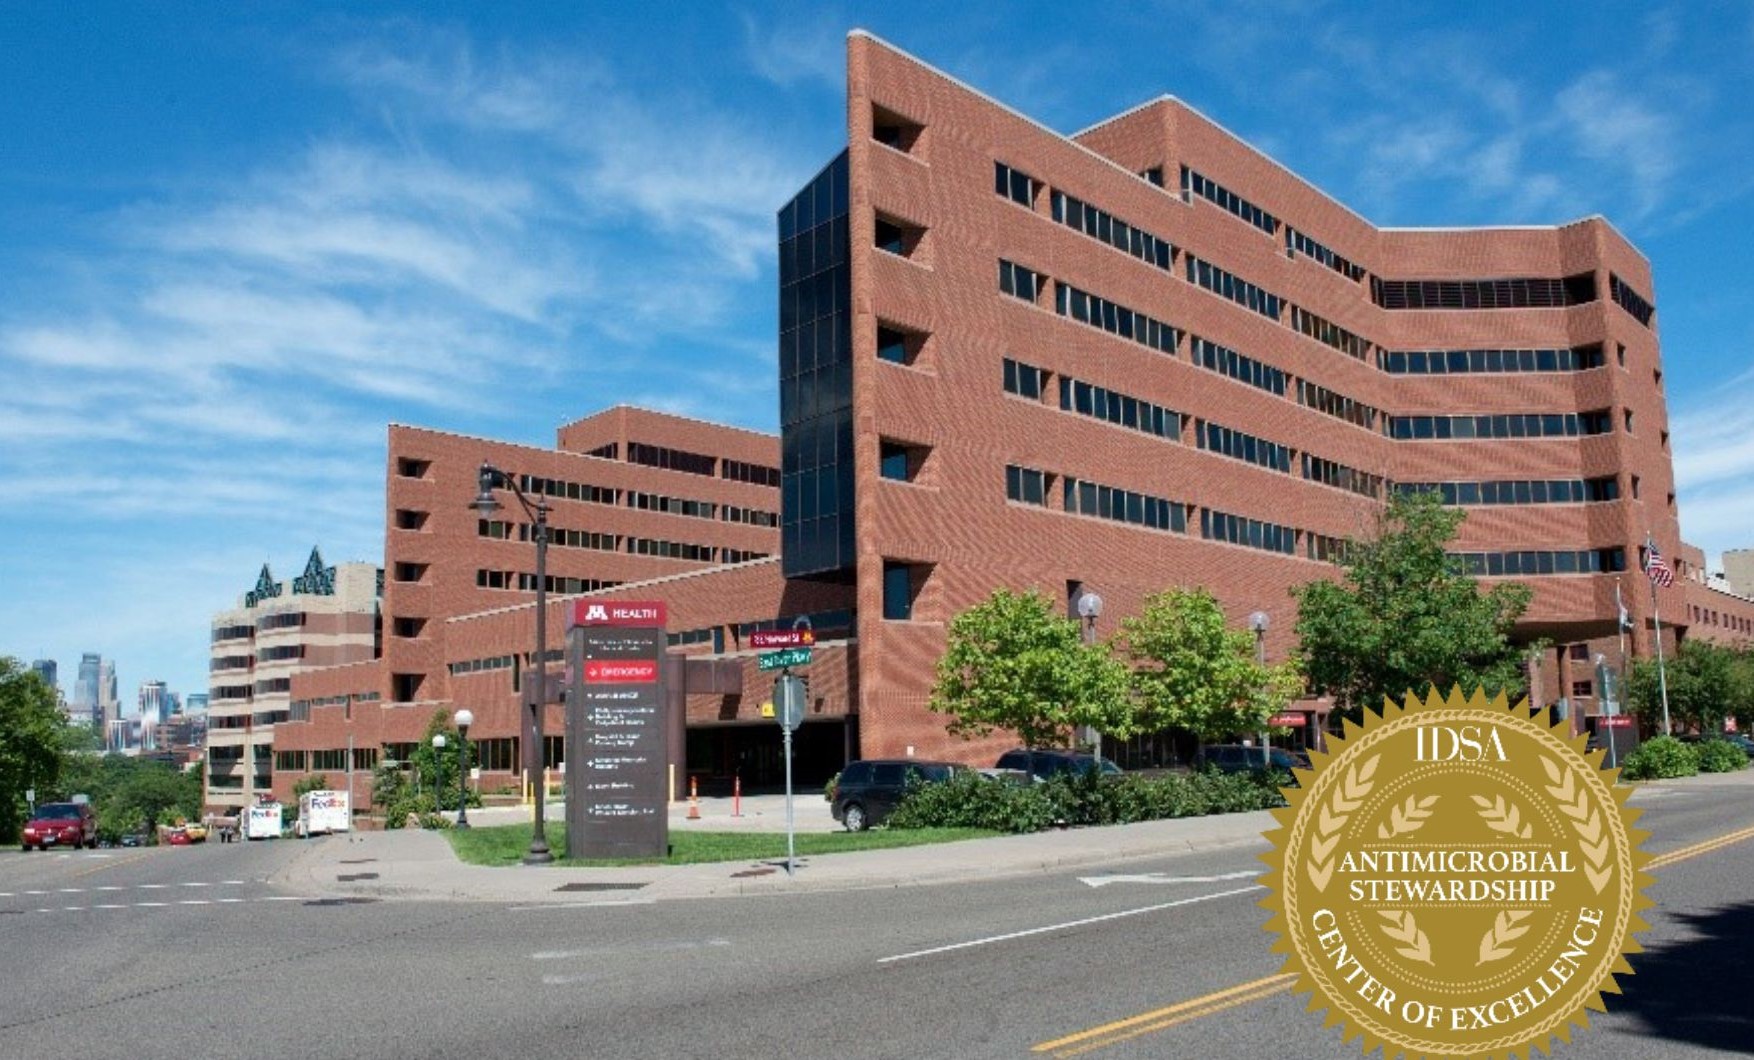 University of Minnesota Medical Center – Antimicrobial Stewardship Center of Excellence